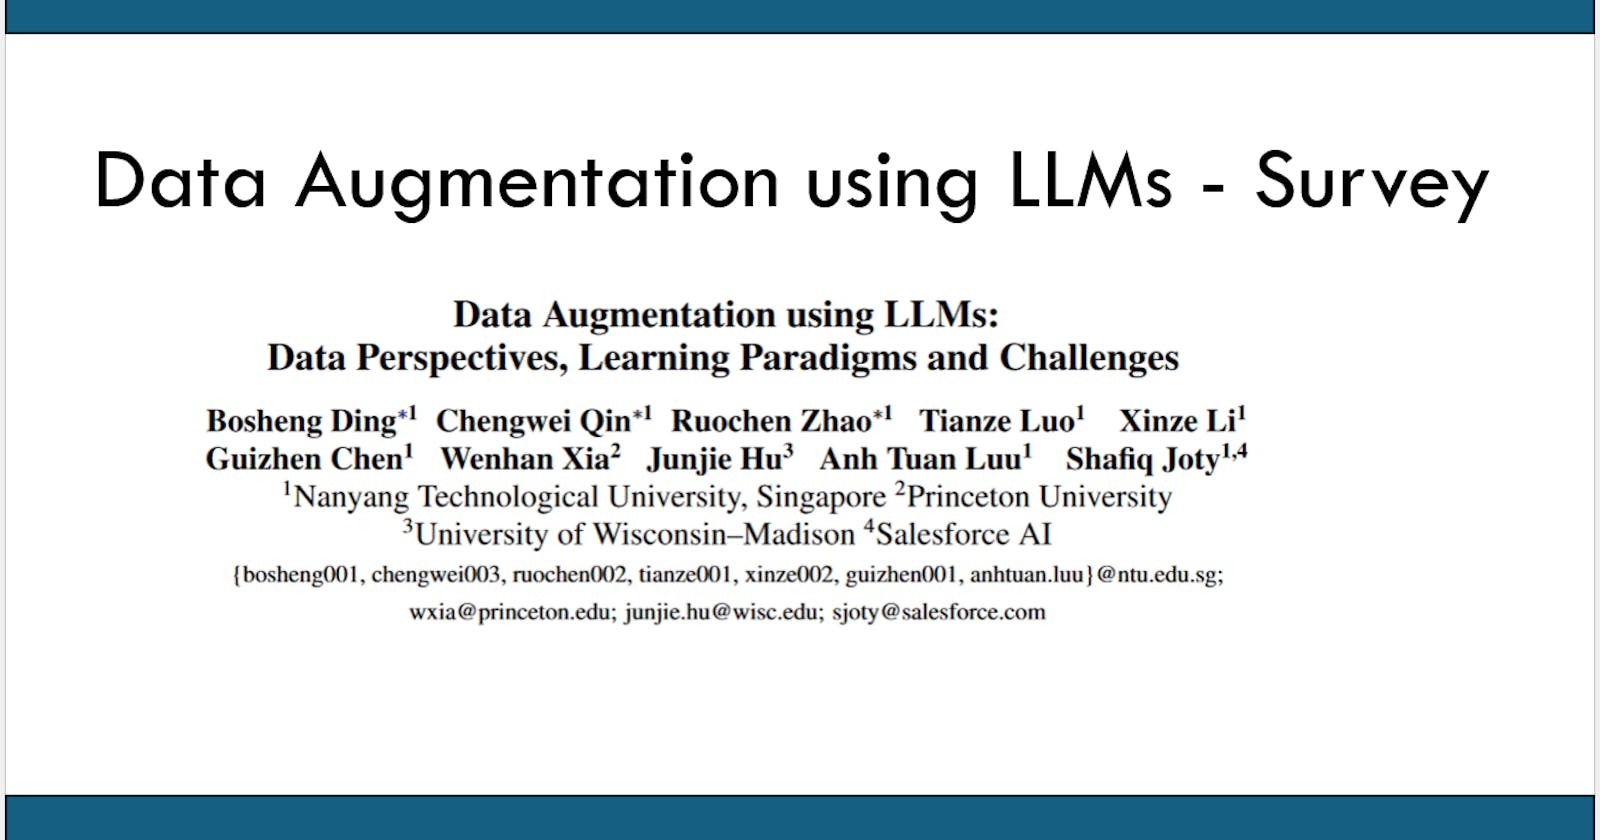 Data Augmentation using LLMs:
Data Perspectives, Learning Paradigms and Challenges (Short Summary)